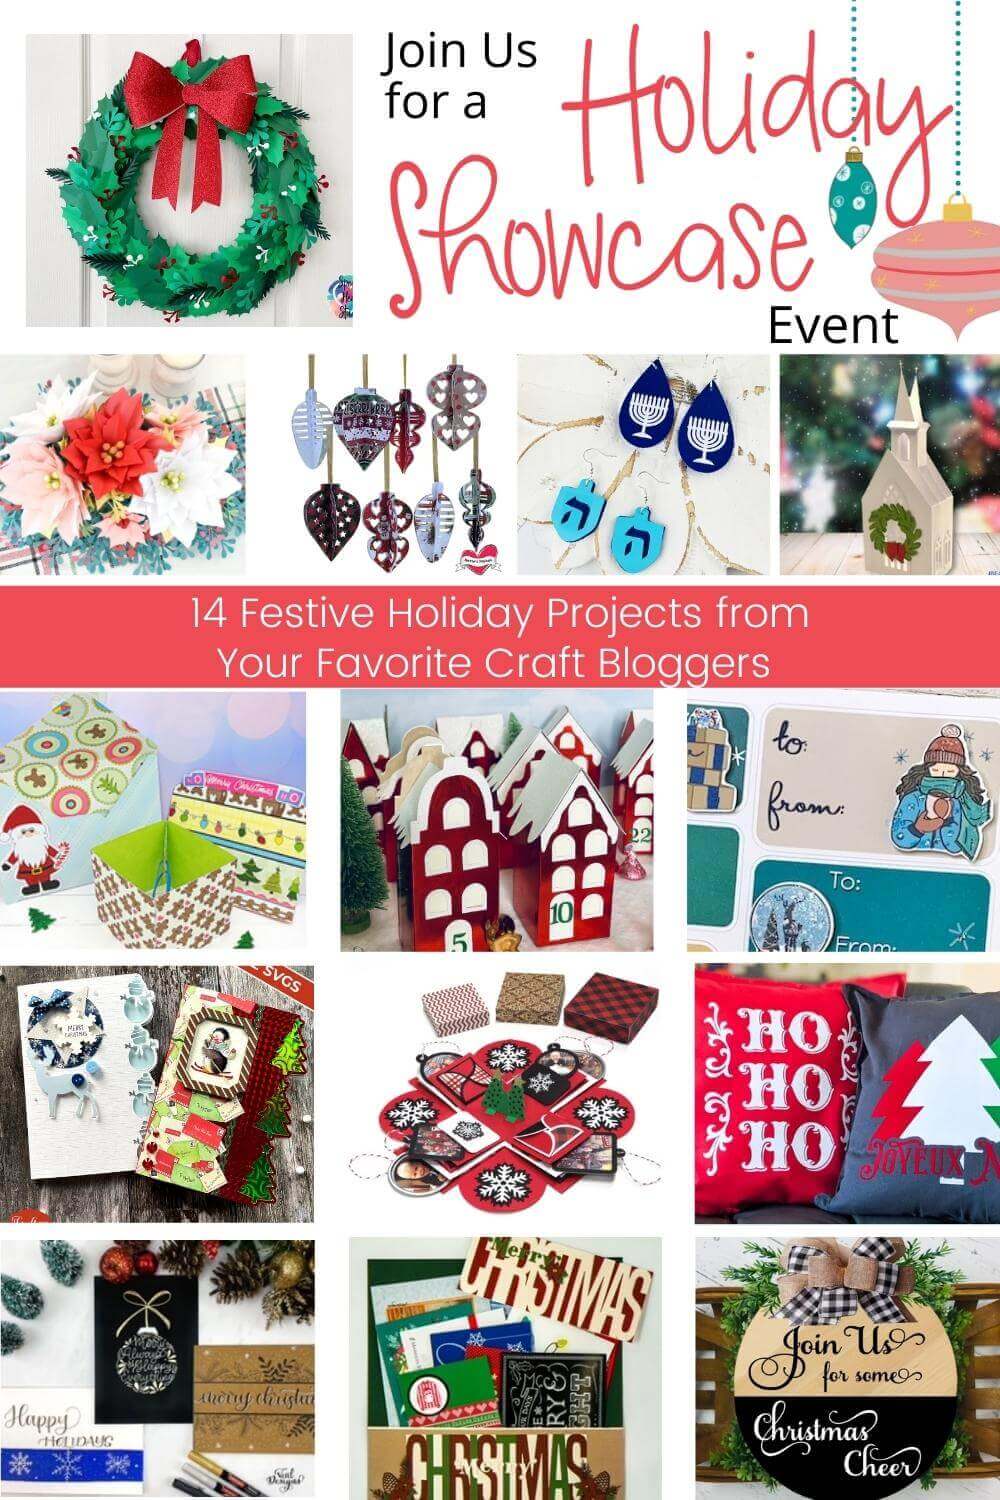 Holiday-showcase-crafting-event-for-christmas-crafts